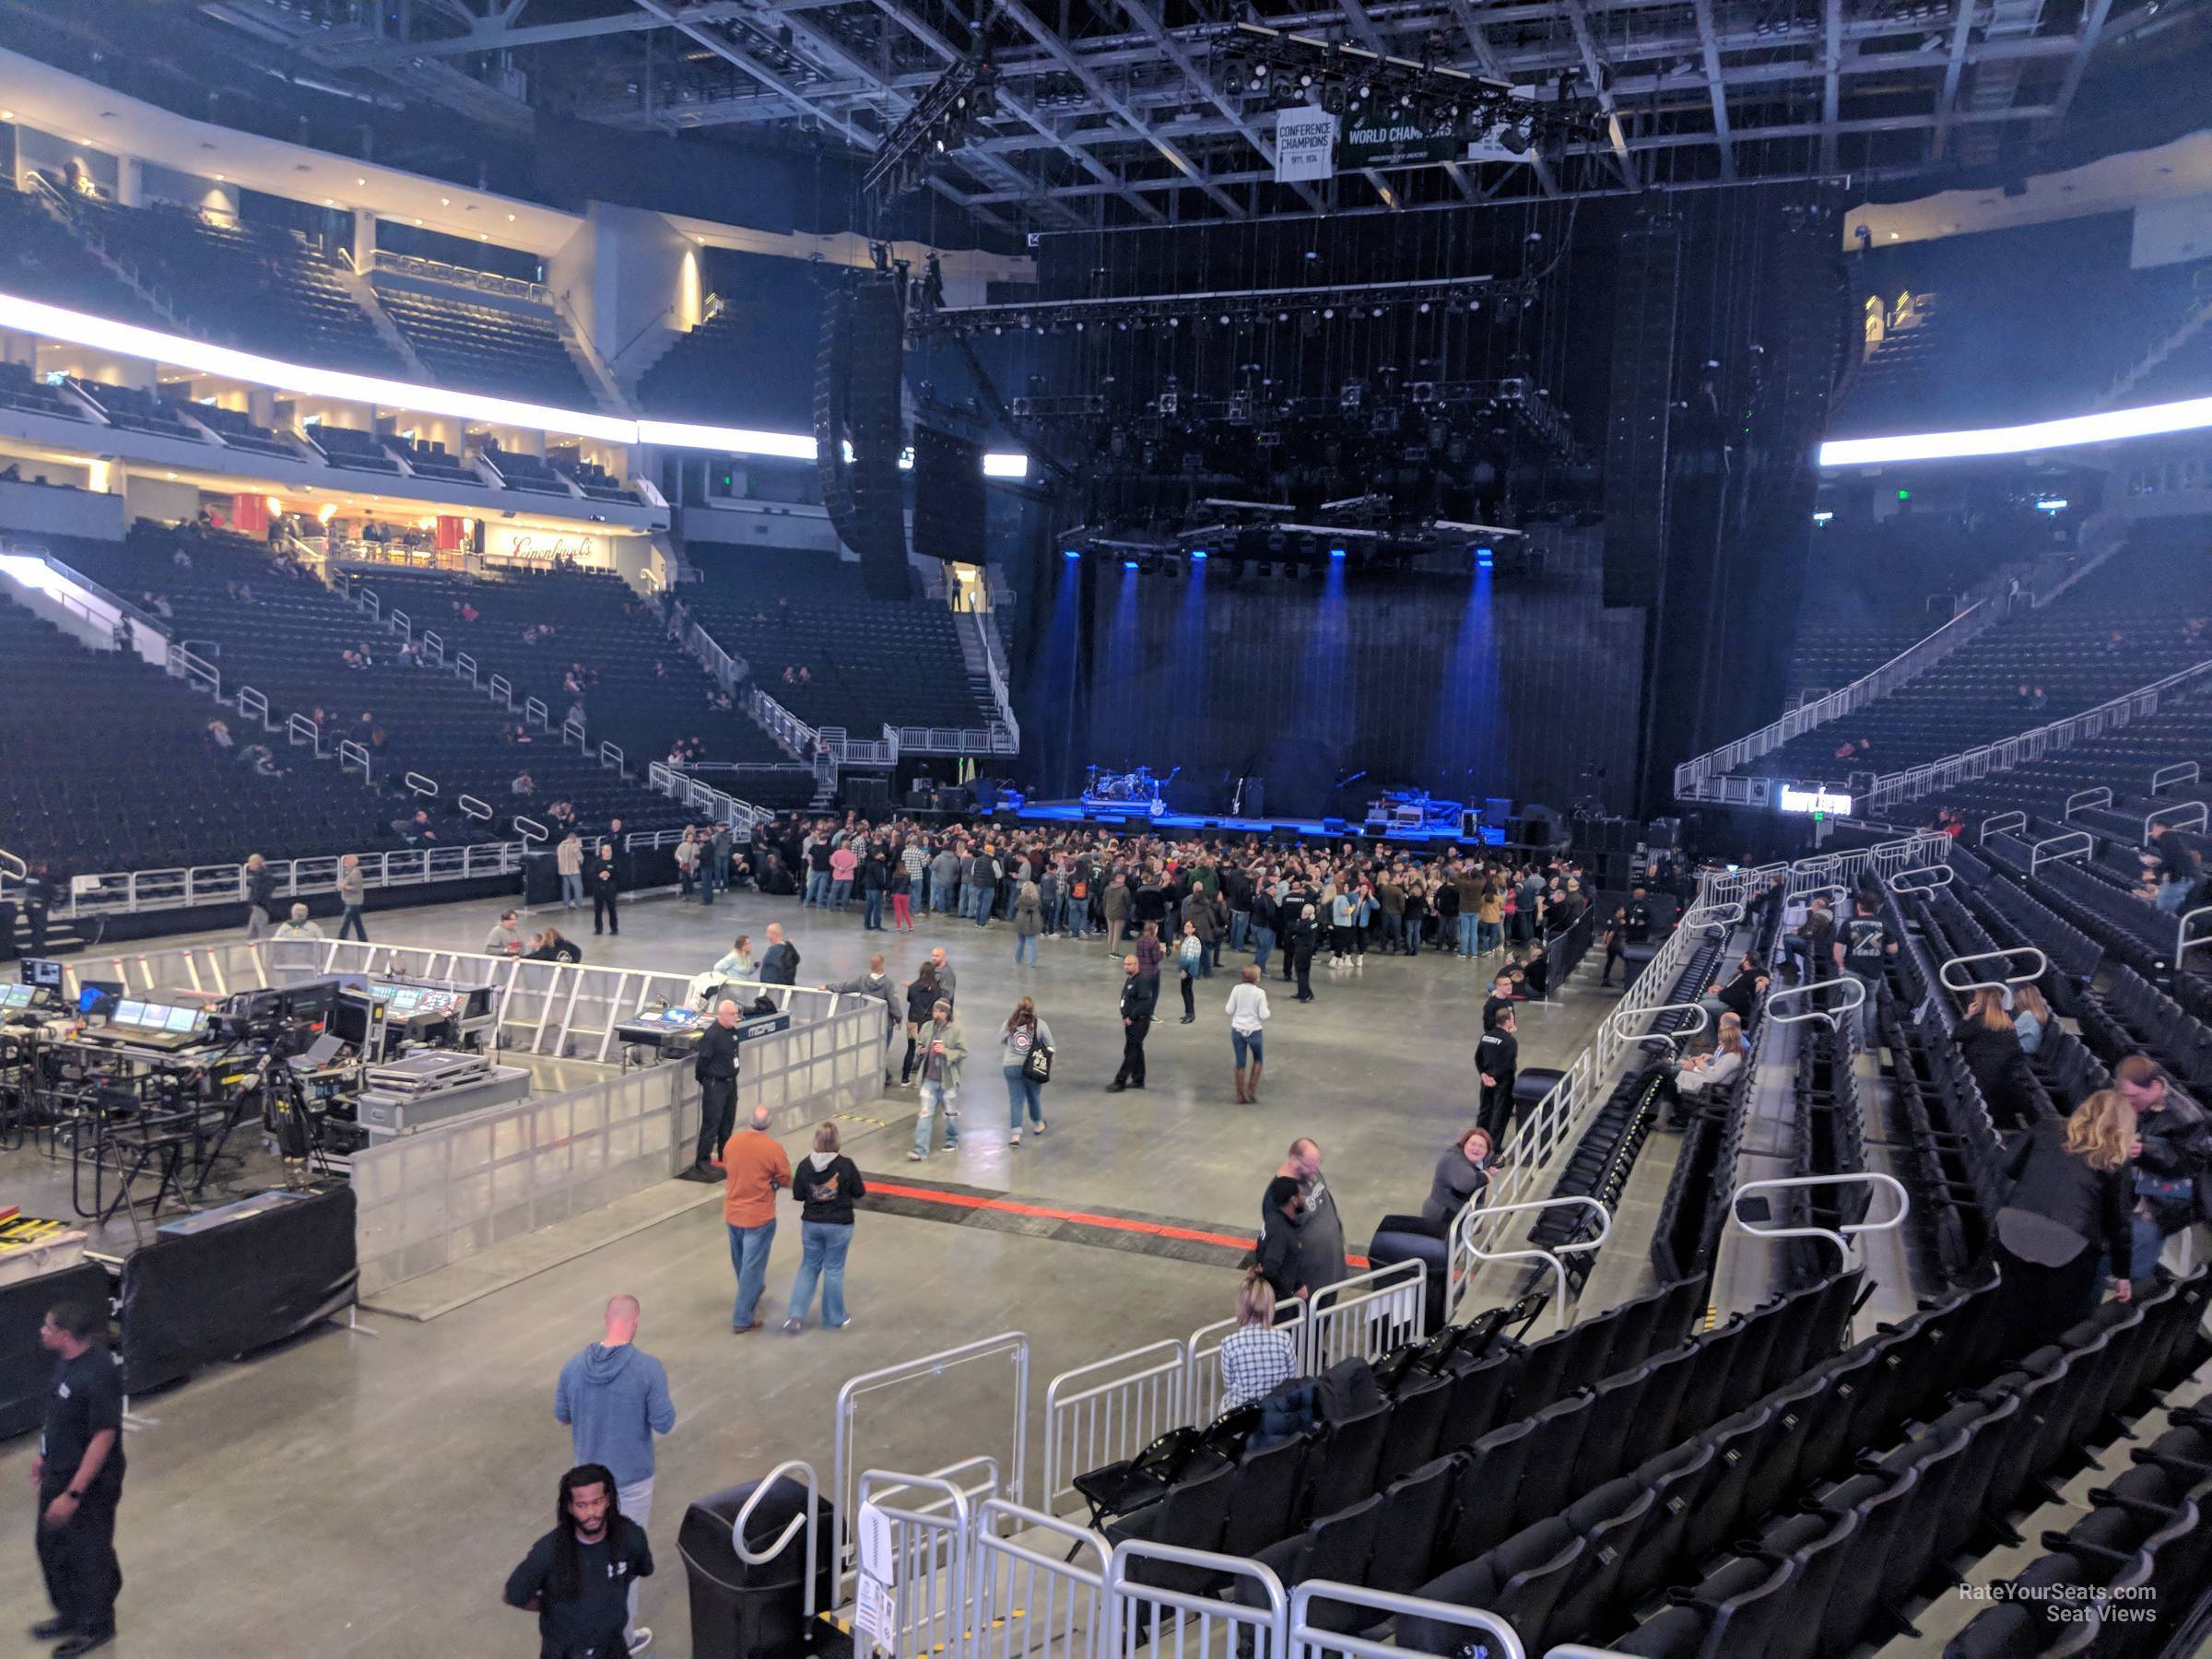 section 120, row 10 seat view  for concert - fiserv forum